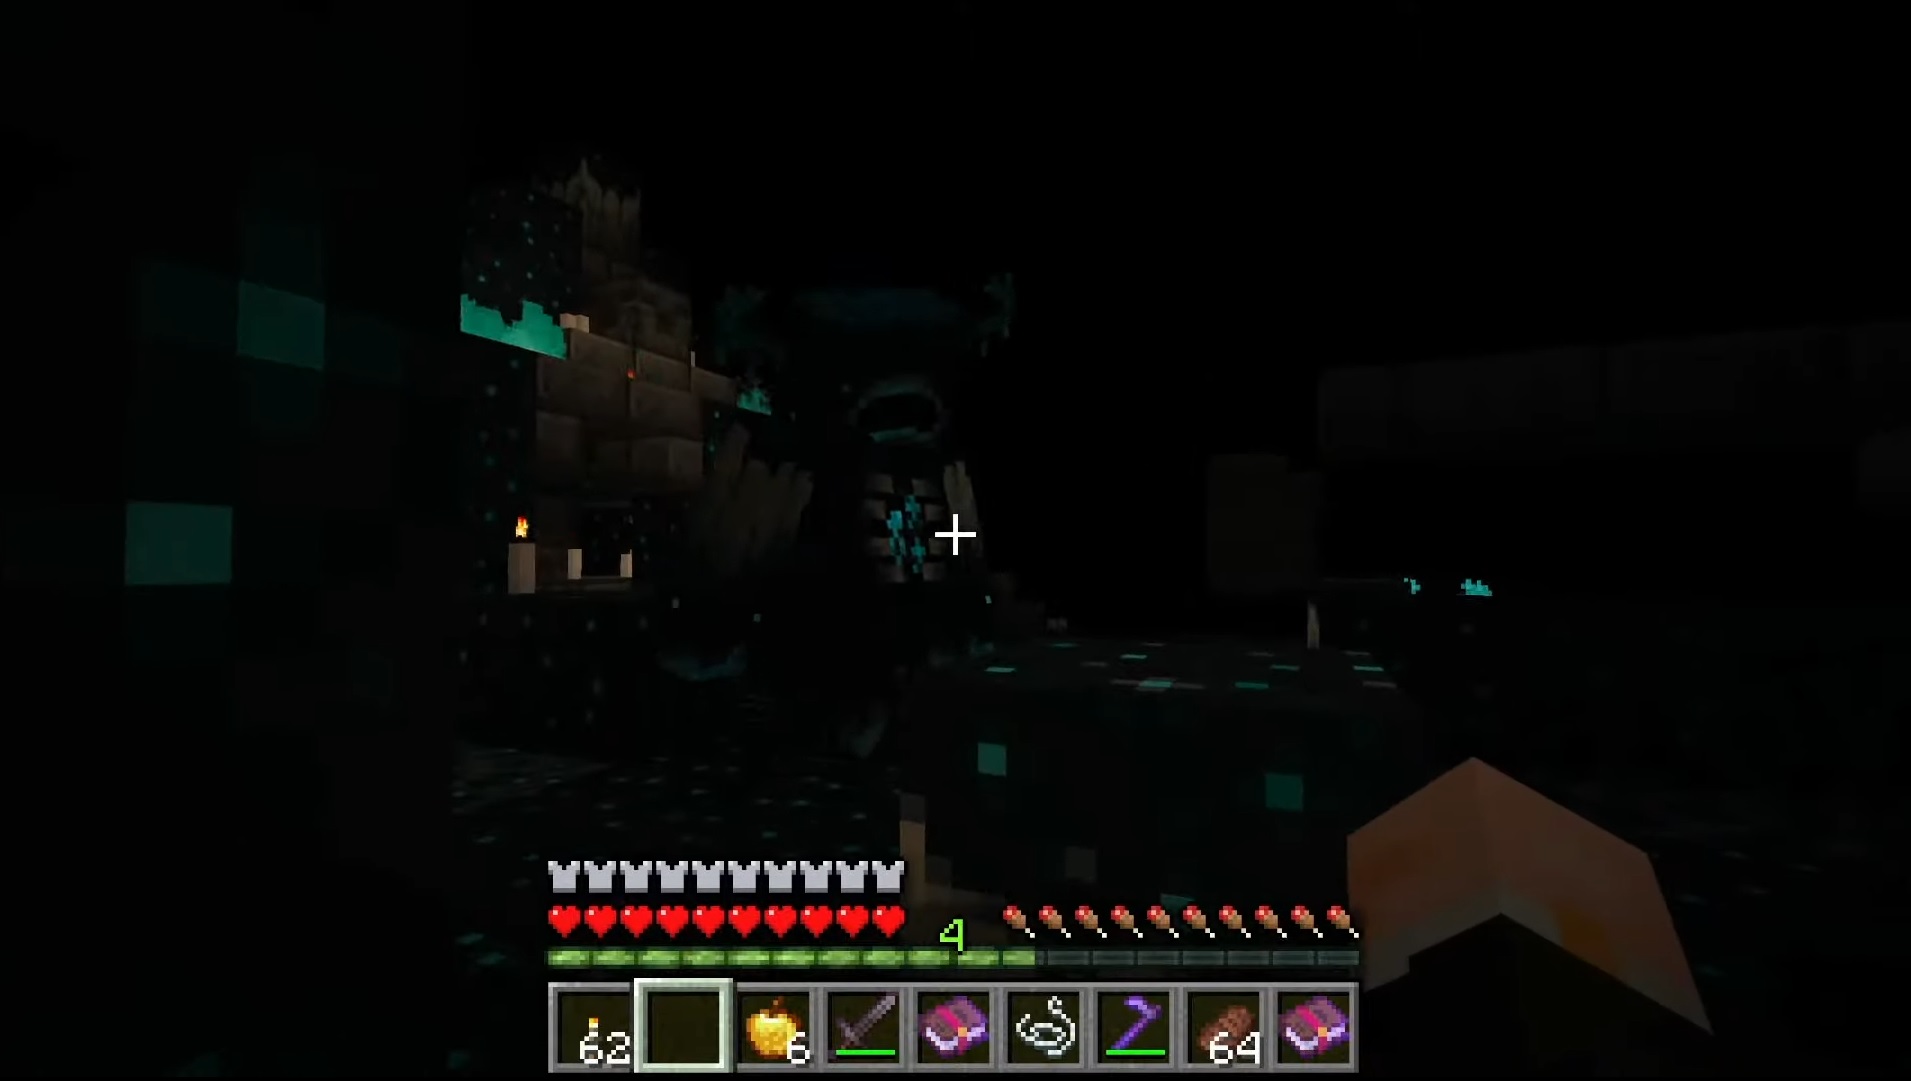 Minecraft - in a very dark Deep Dark ancient city, a Warden towers over the player with a glowing teal heart